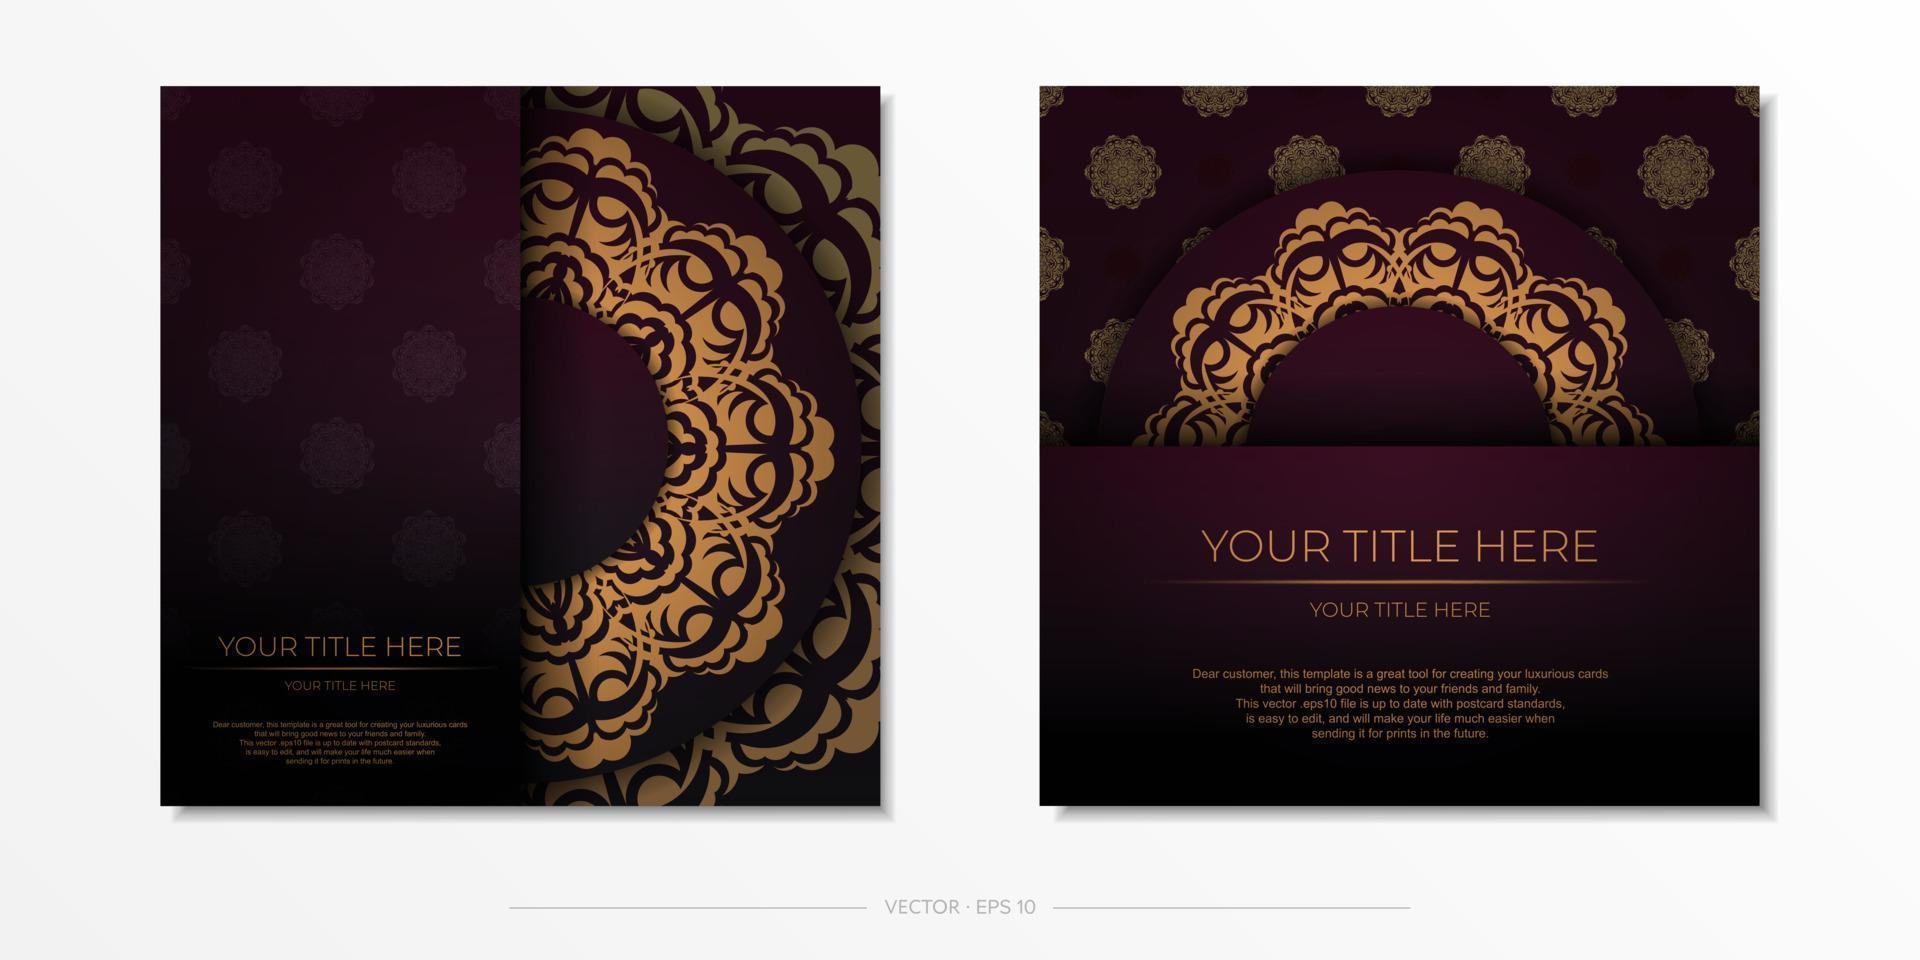 Luxurious preparation of postcards in burgundy color with vintage ornaments. Template for design printable invitation card with mandala patterns. vector